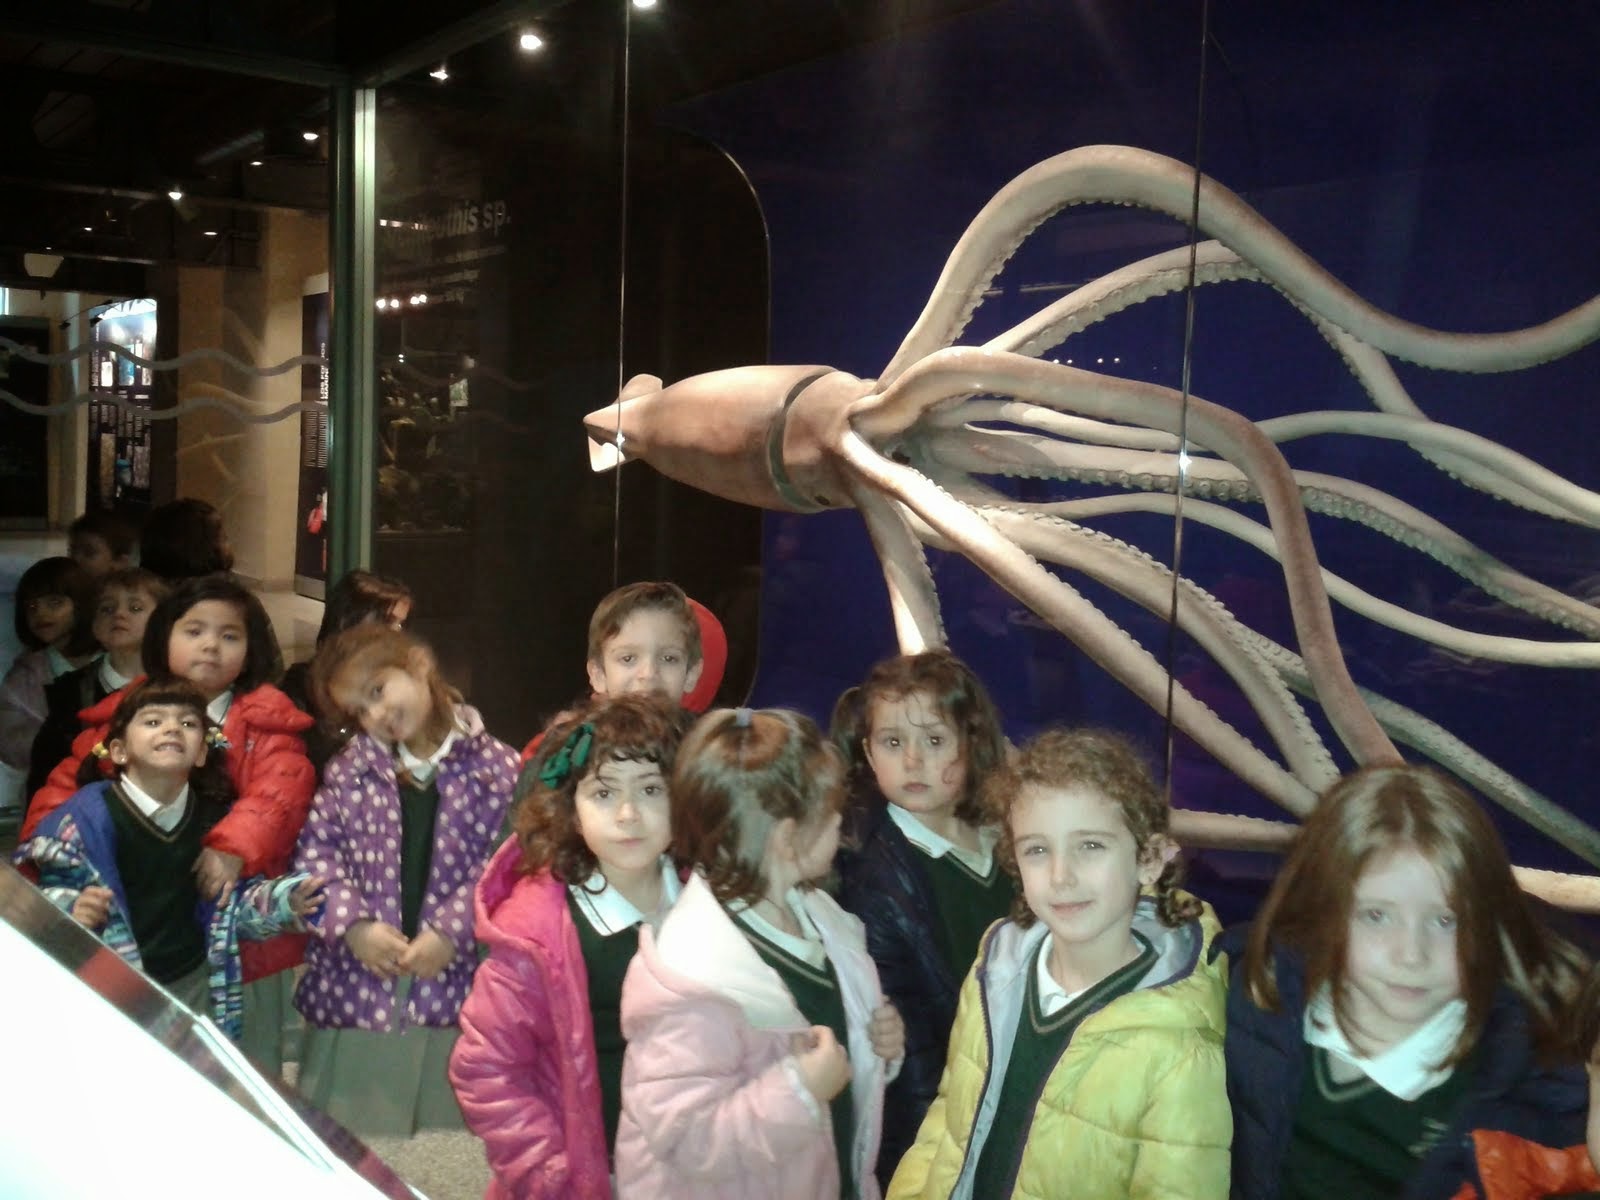 https://picasaweb.google.com/108366366089423600659/131407EXCURSIONMUSEOCIENCIASNATURALES4PRIMARIA?authuser=0&authkey=Gv1sRgCNeRp9rb4ZvvqgE&feat=directlink